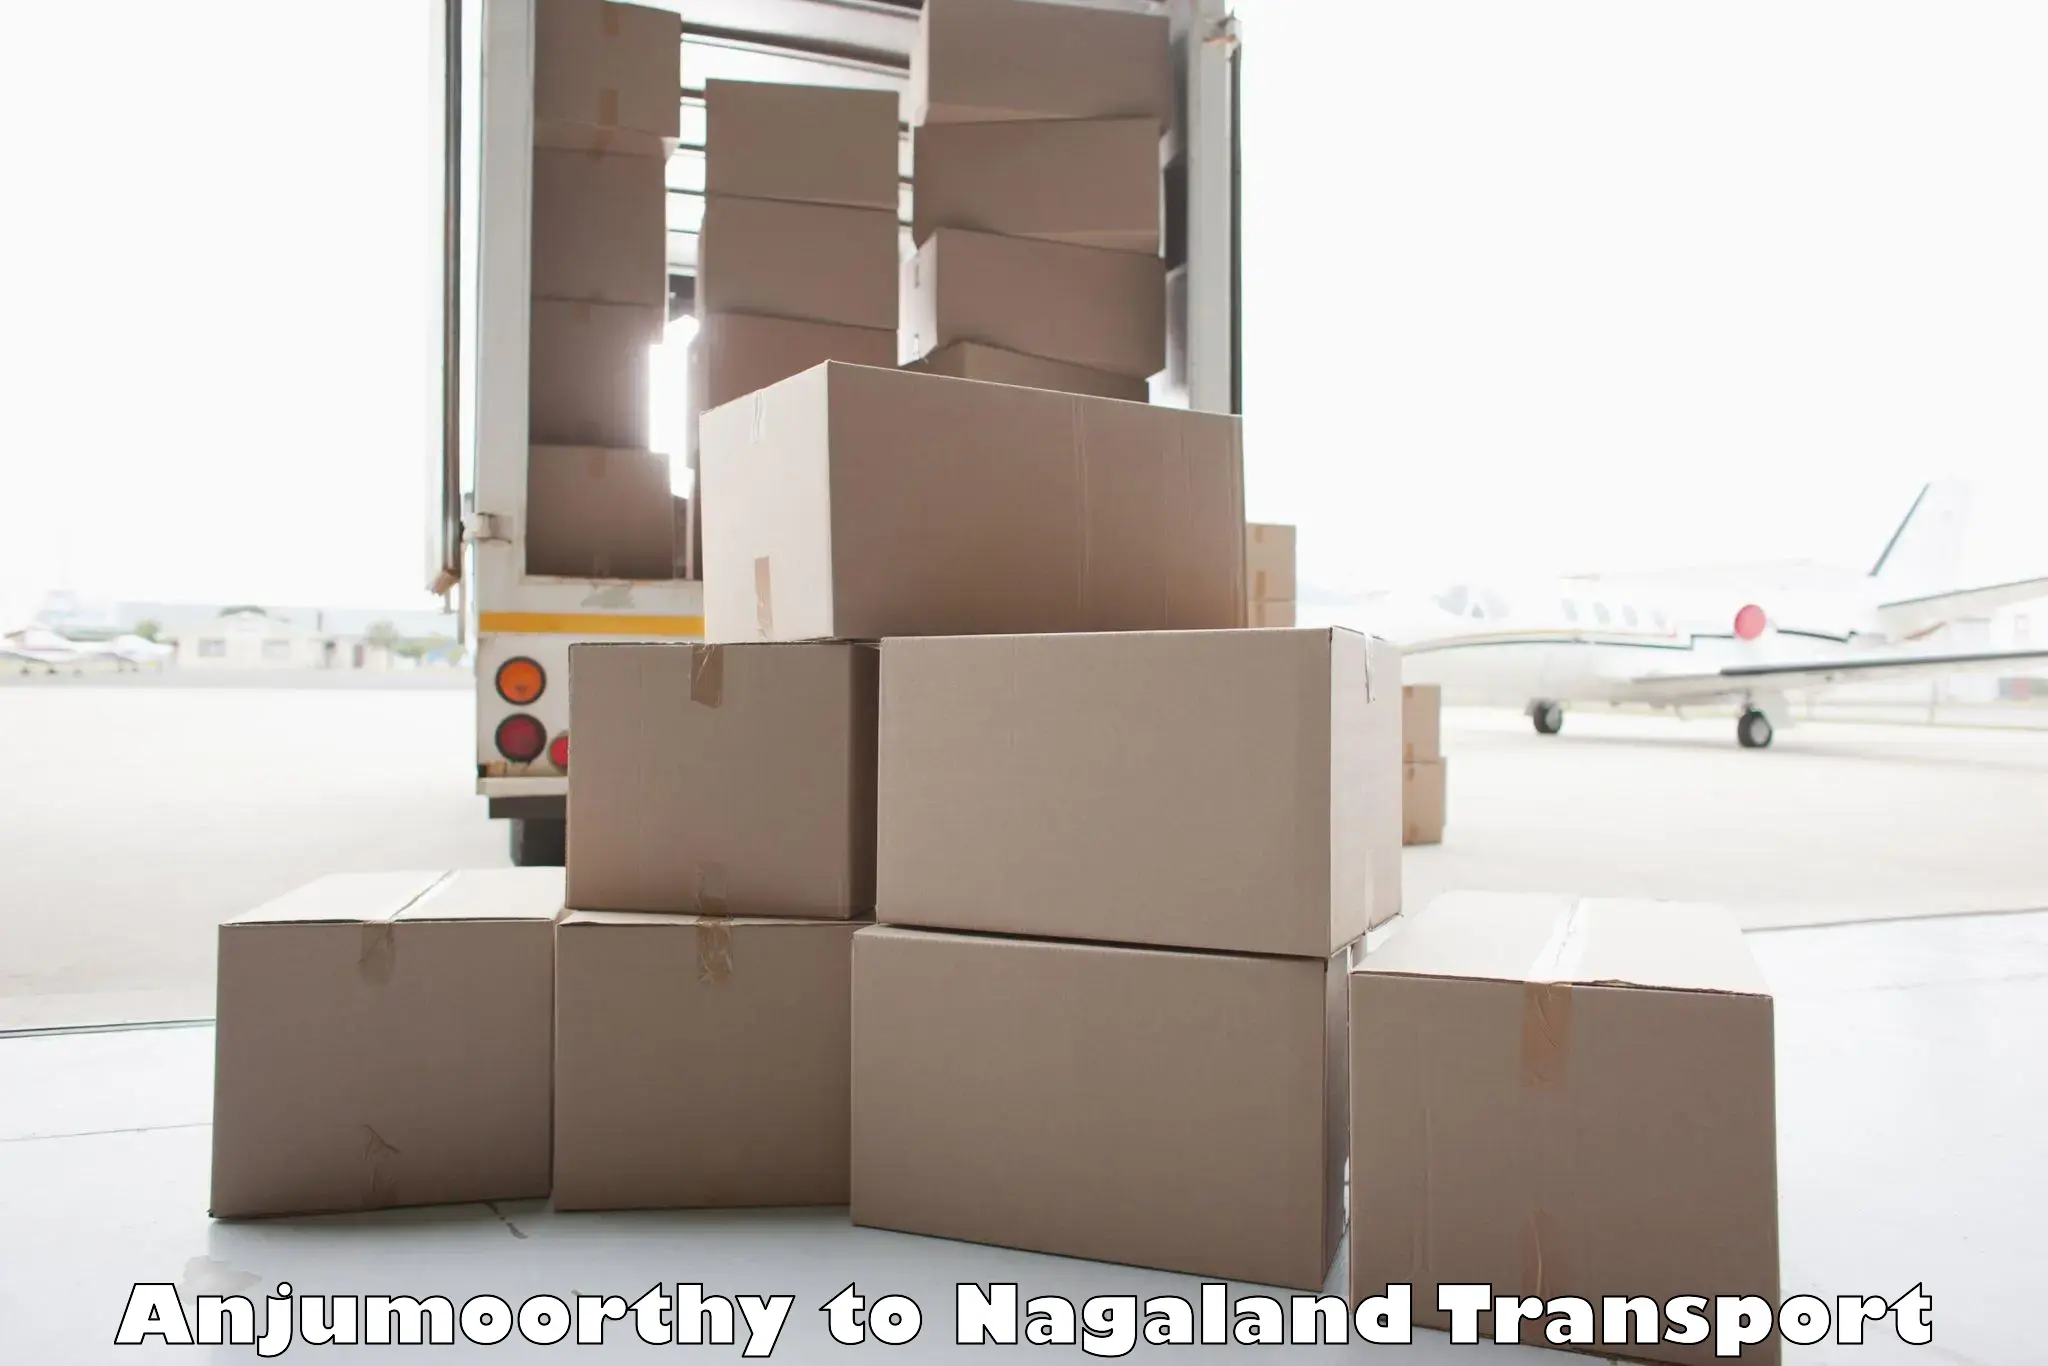 Container transport service in Anjumoorthy to Dimapur